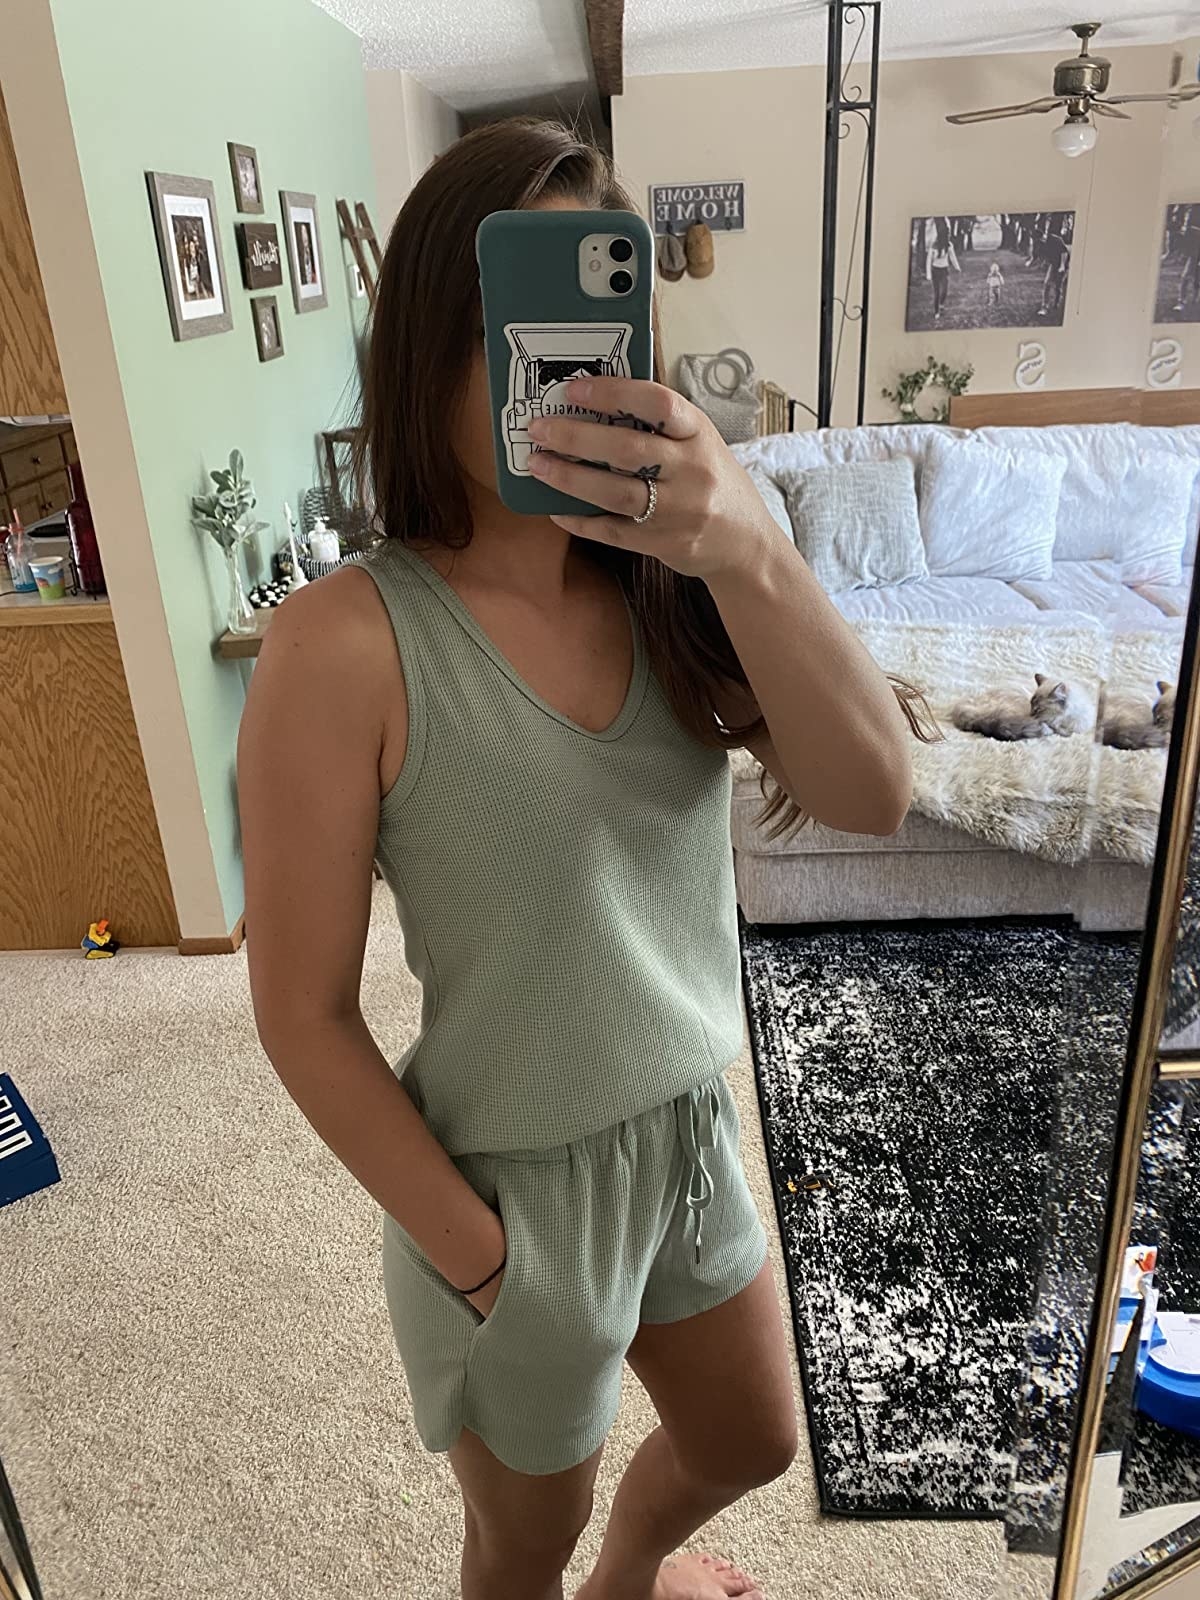 Reviewer is wearing a pale green tank top and short pajamas set